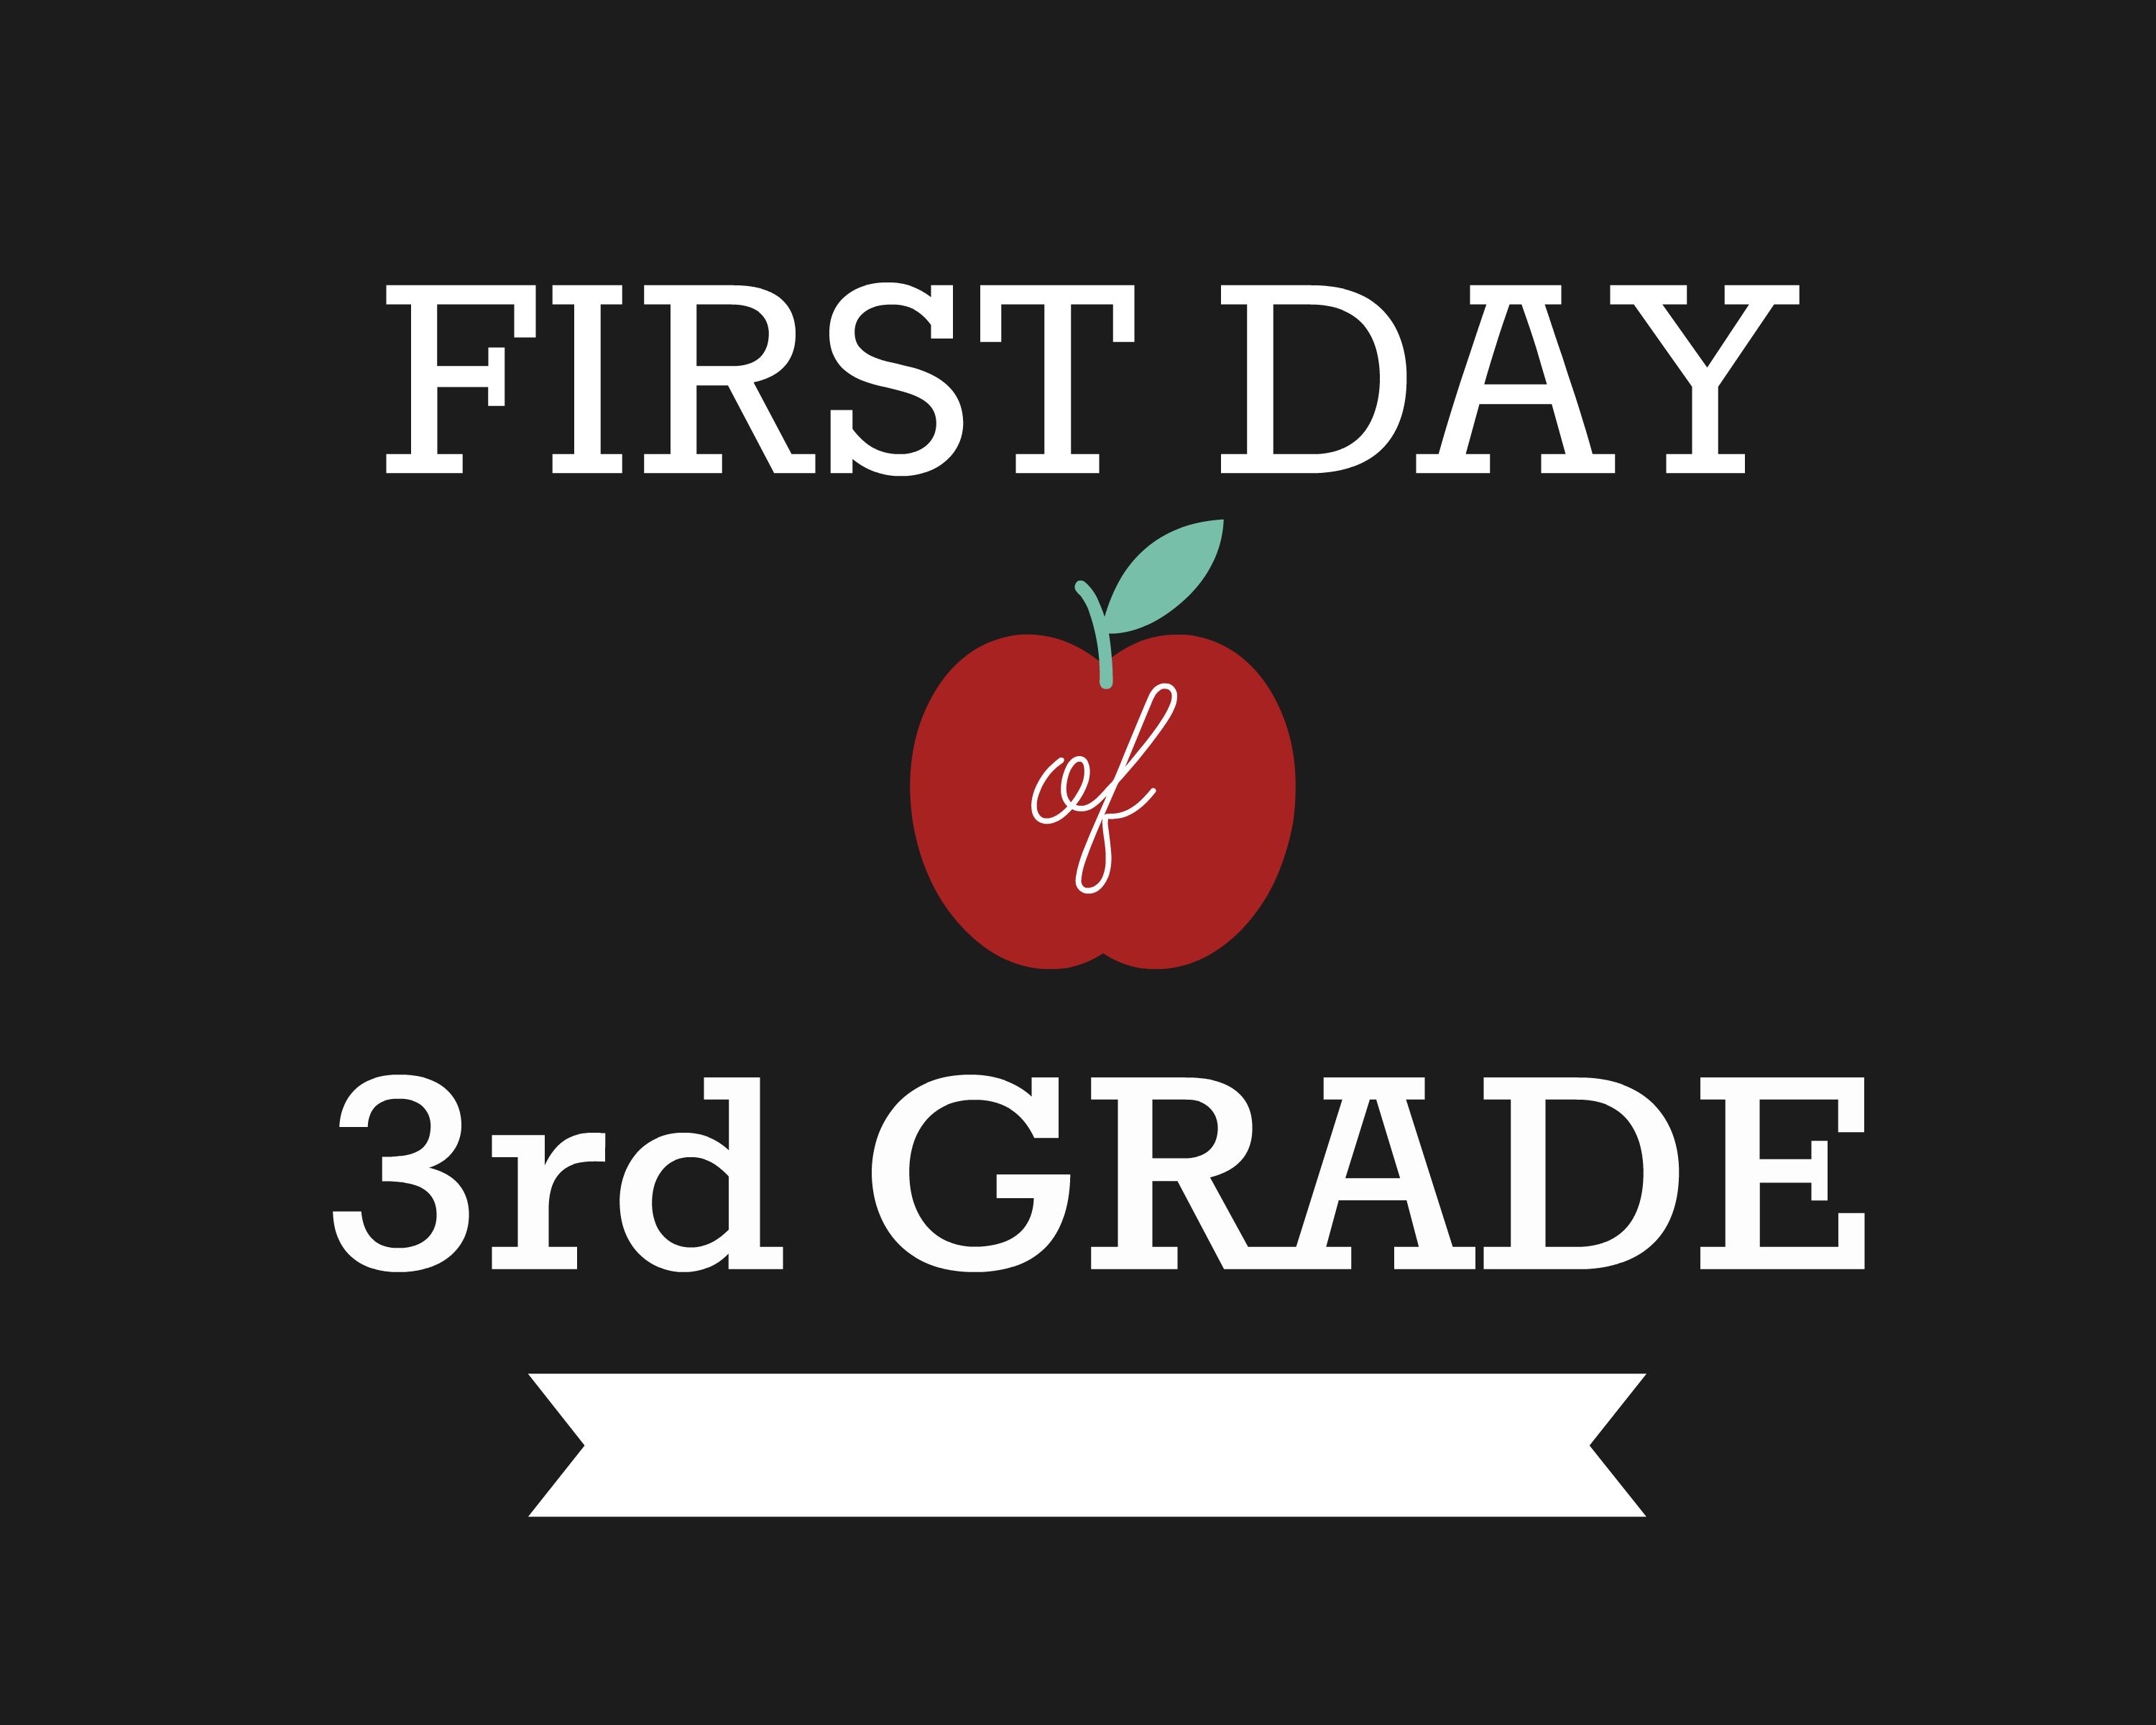 DIY First Day Of School Signs Ruler Craft Pre K Up To Grade 12 